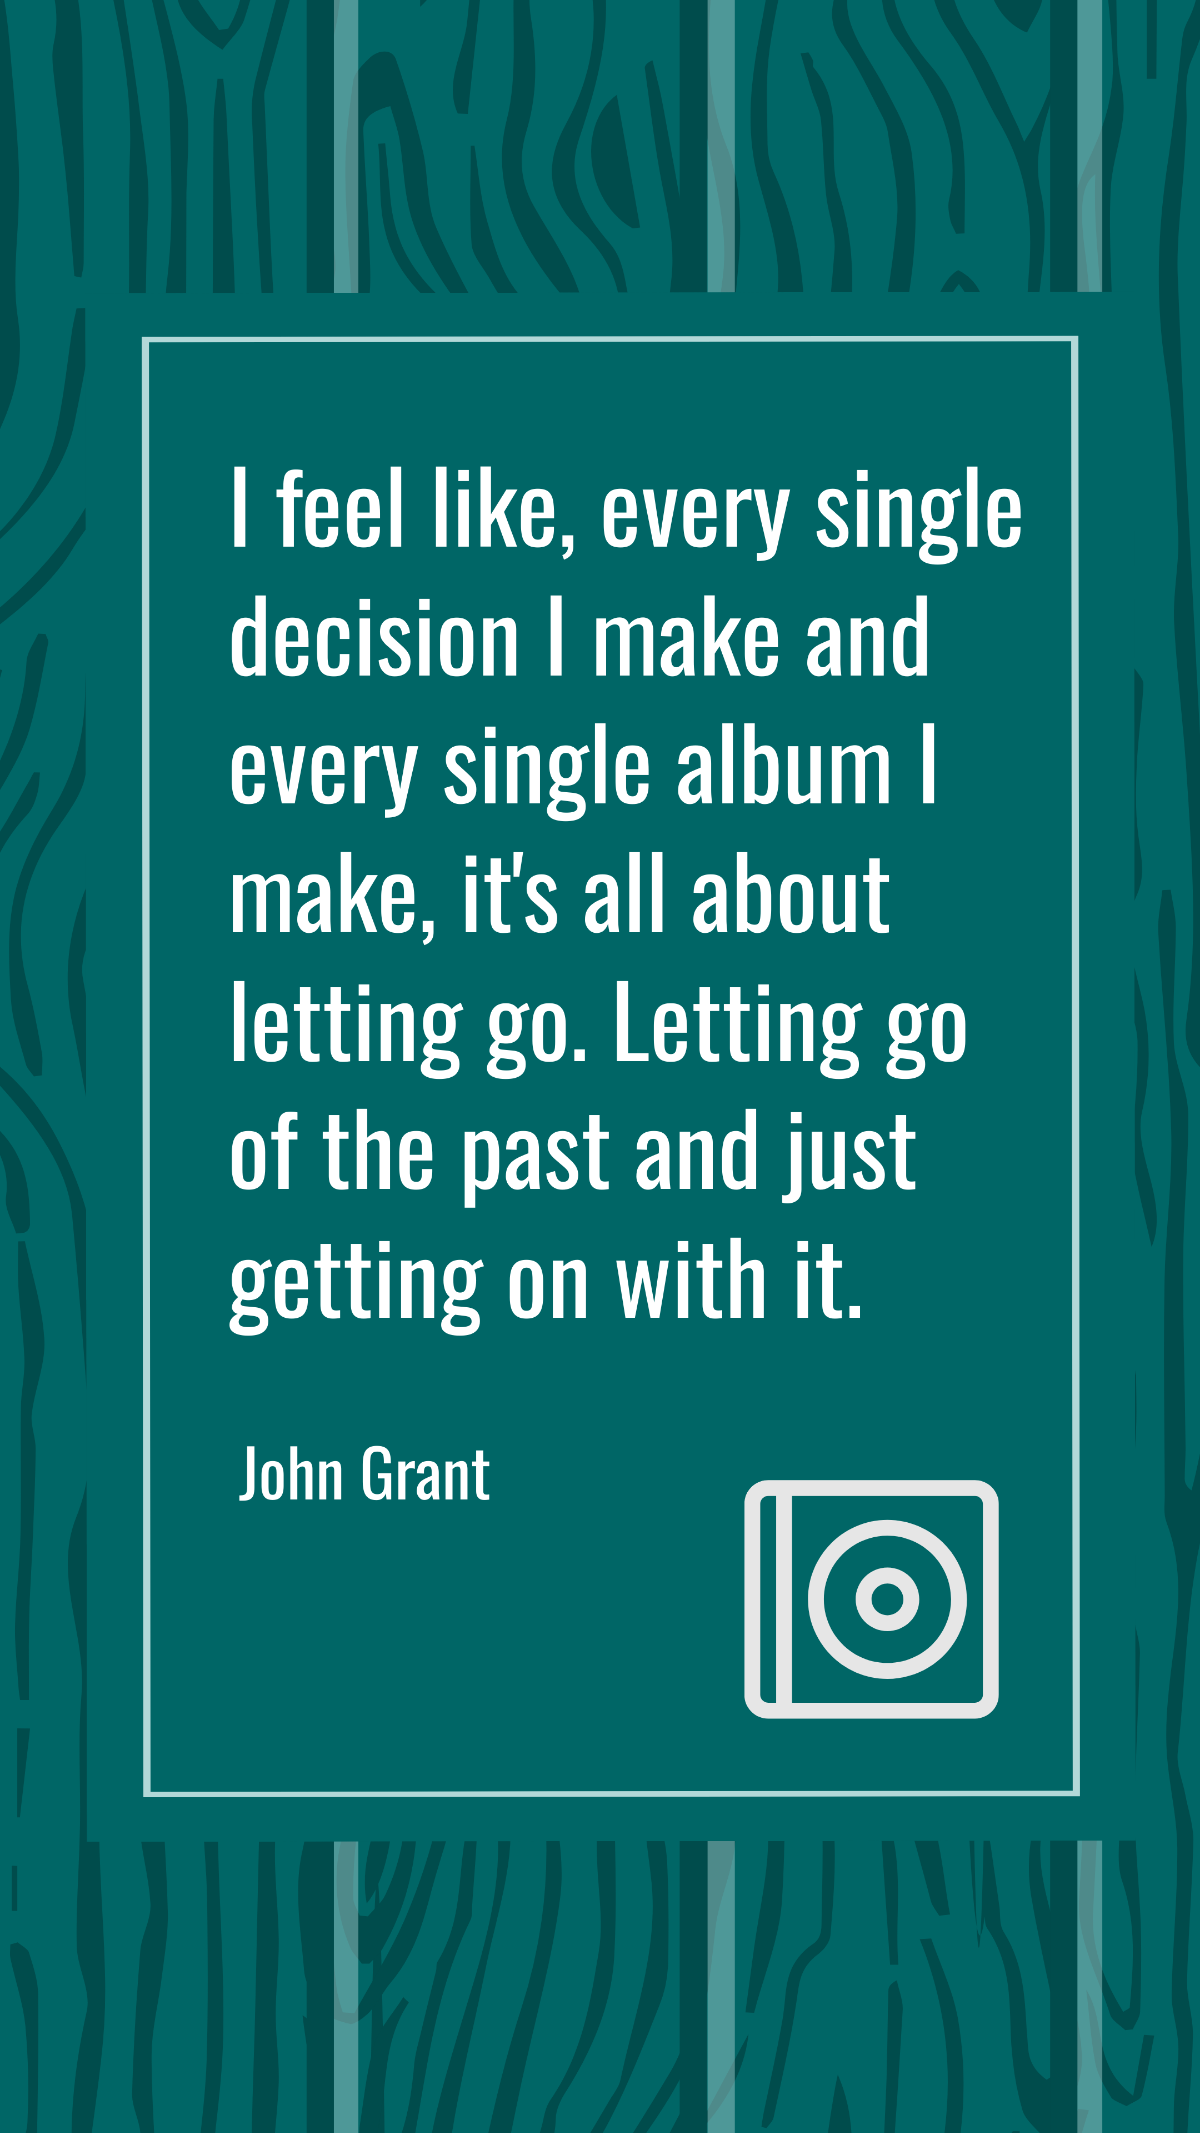 John Grant - I feel like, every single decision I make and every single album I make, it's all about letting go. Letting go of the past and just getting on with it. Template